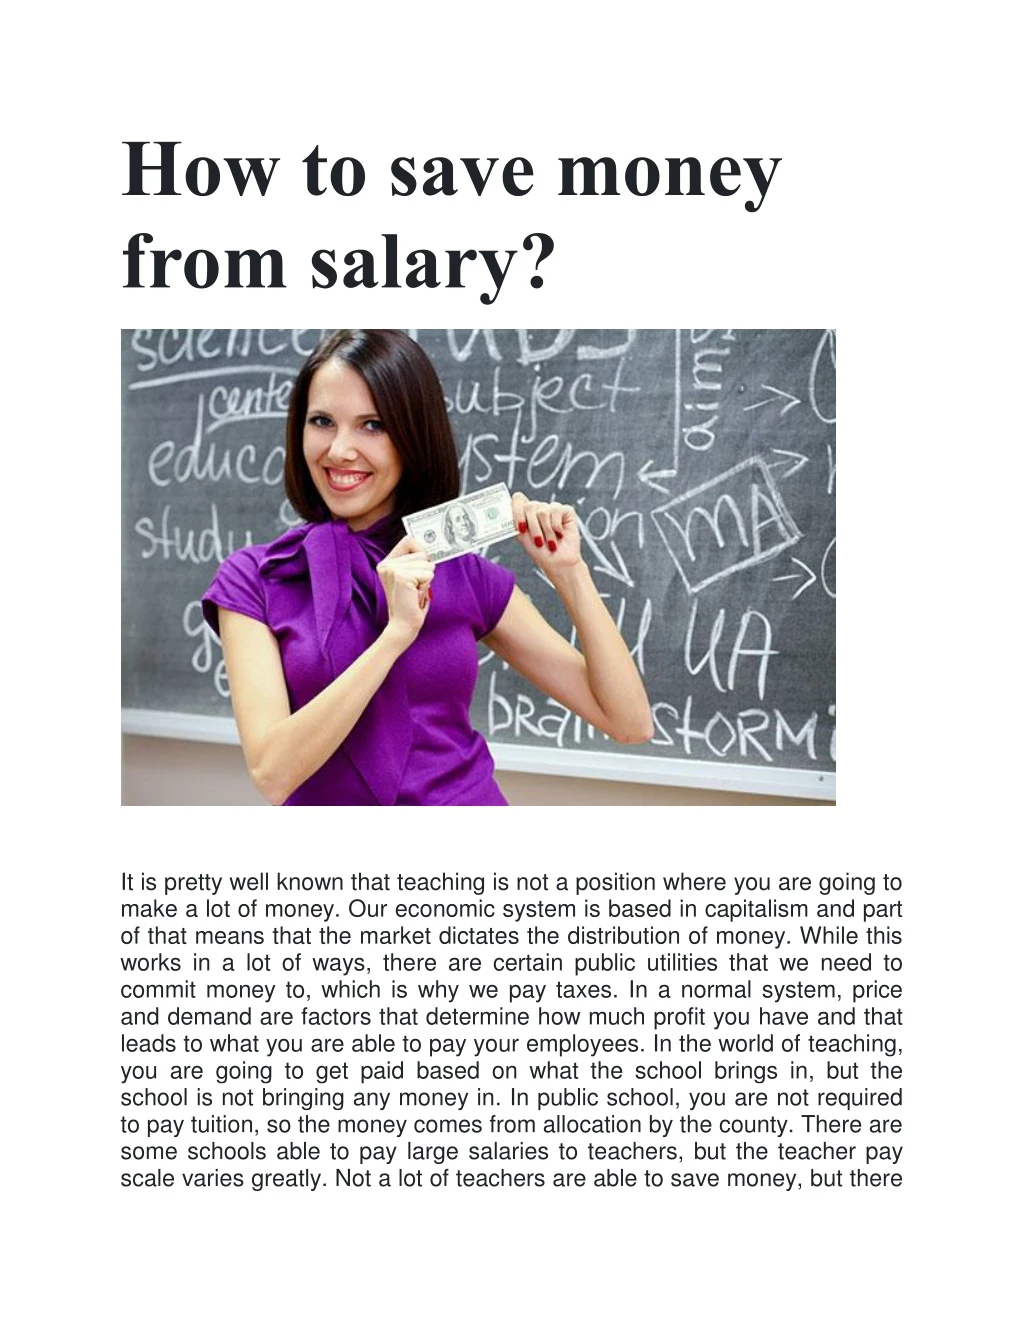 how to save money from salary